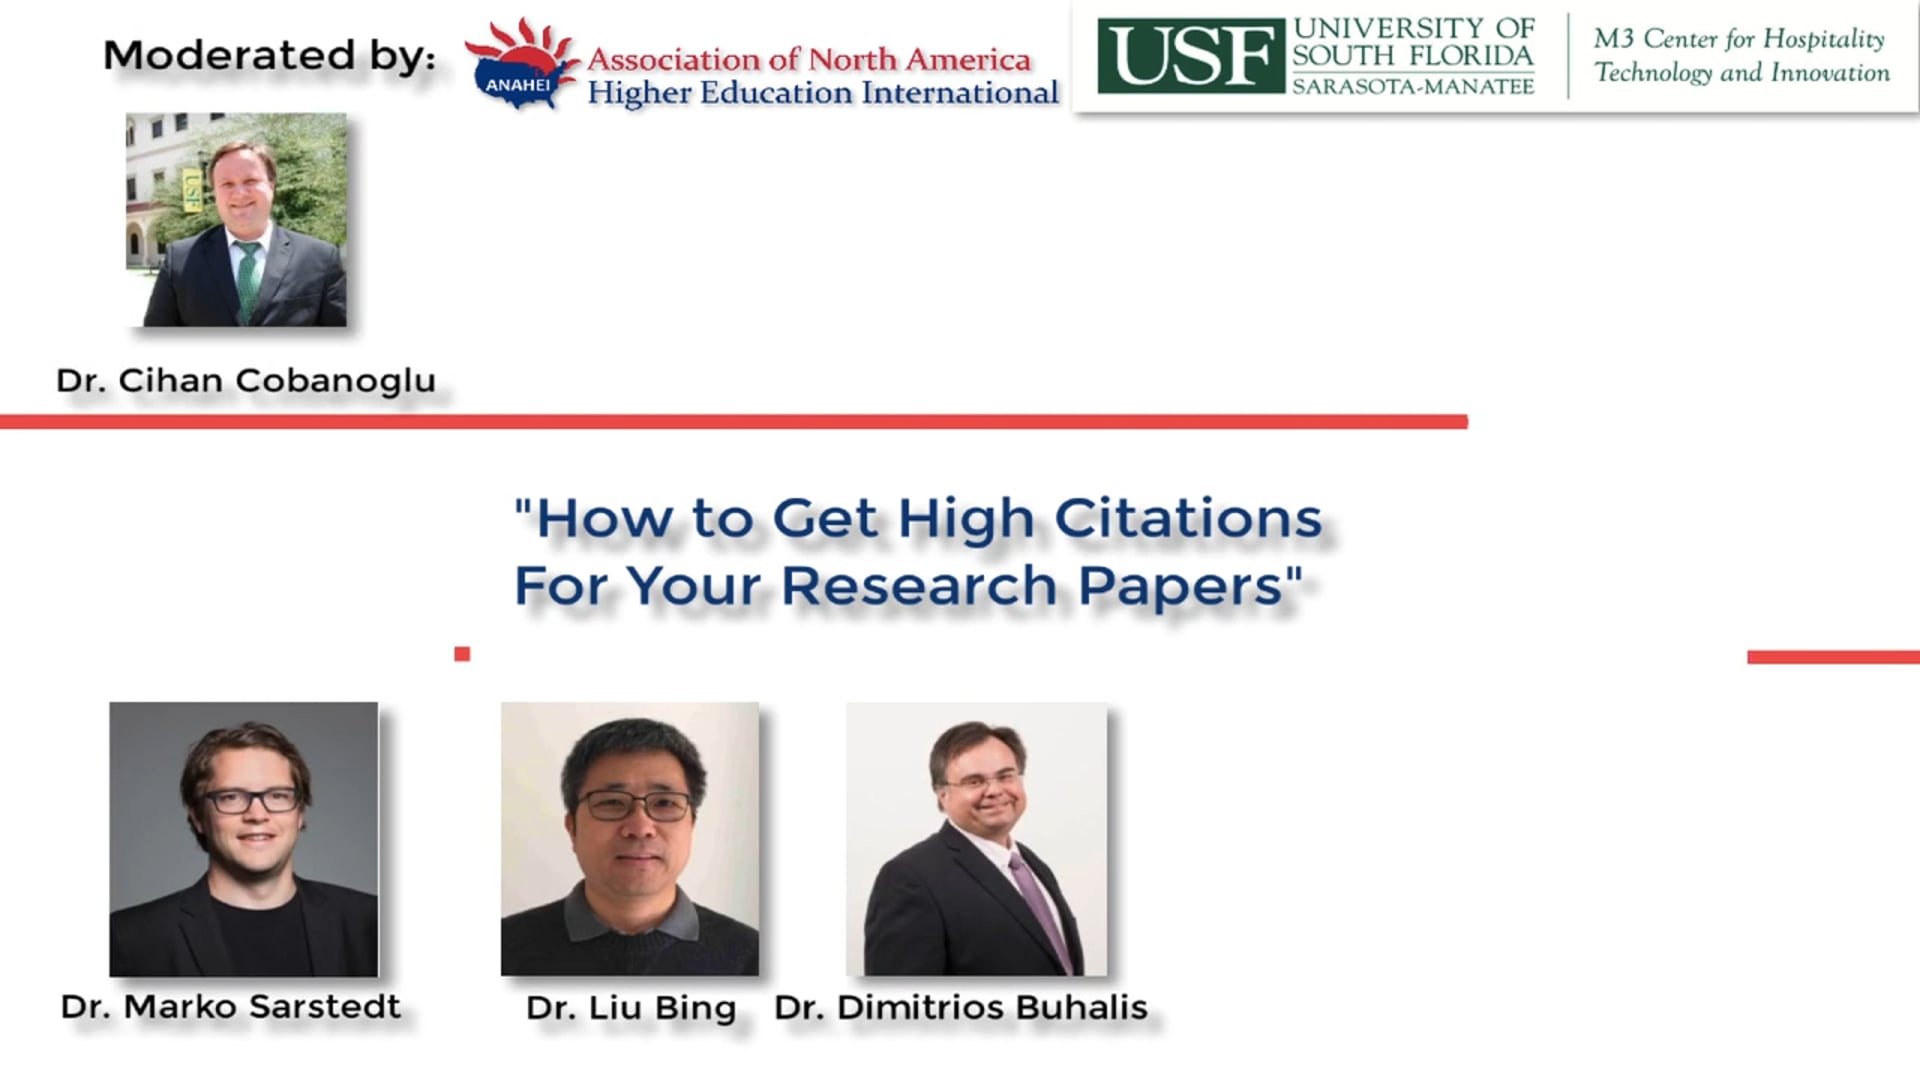 How to Get High Citations for Your Research Papers